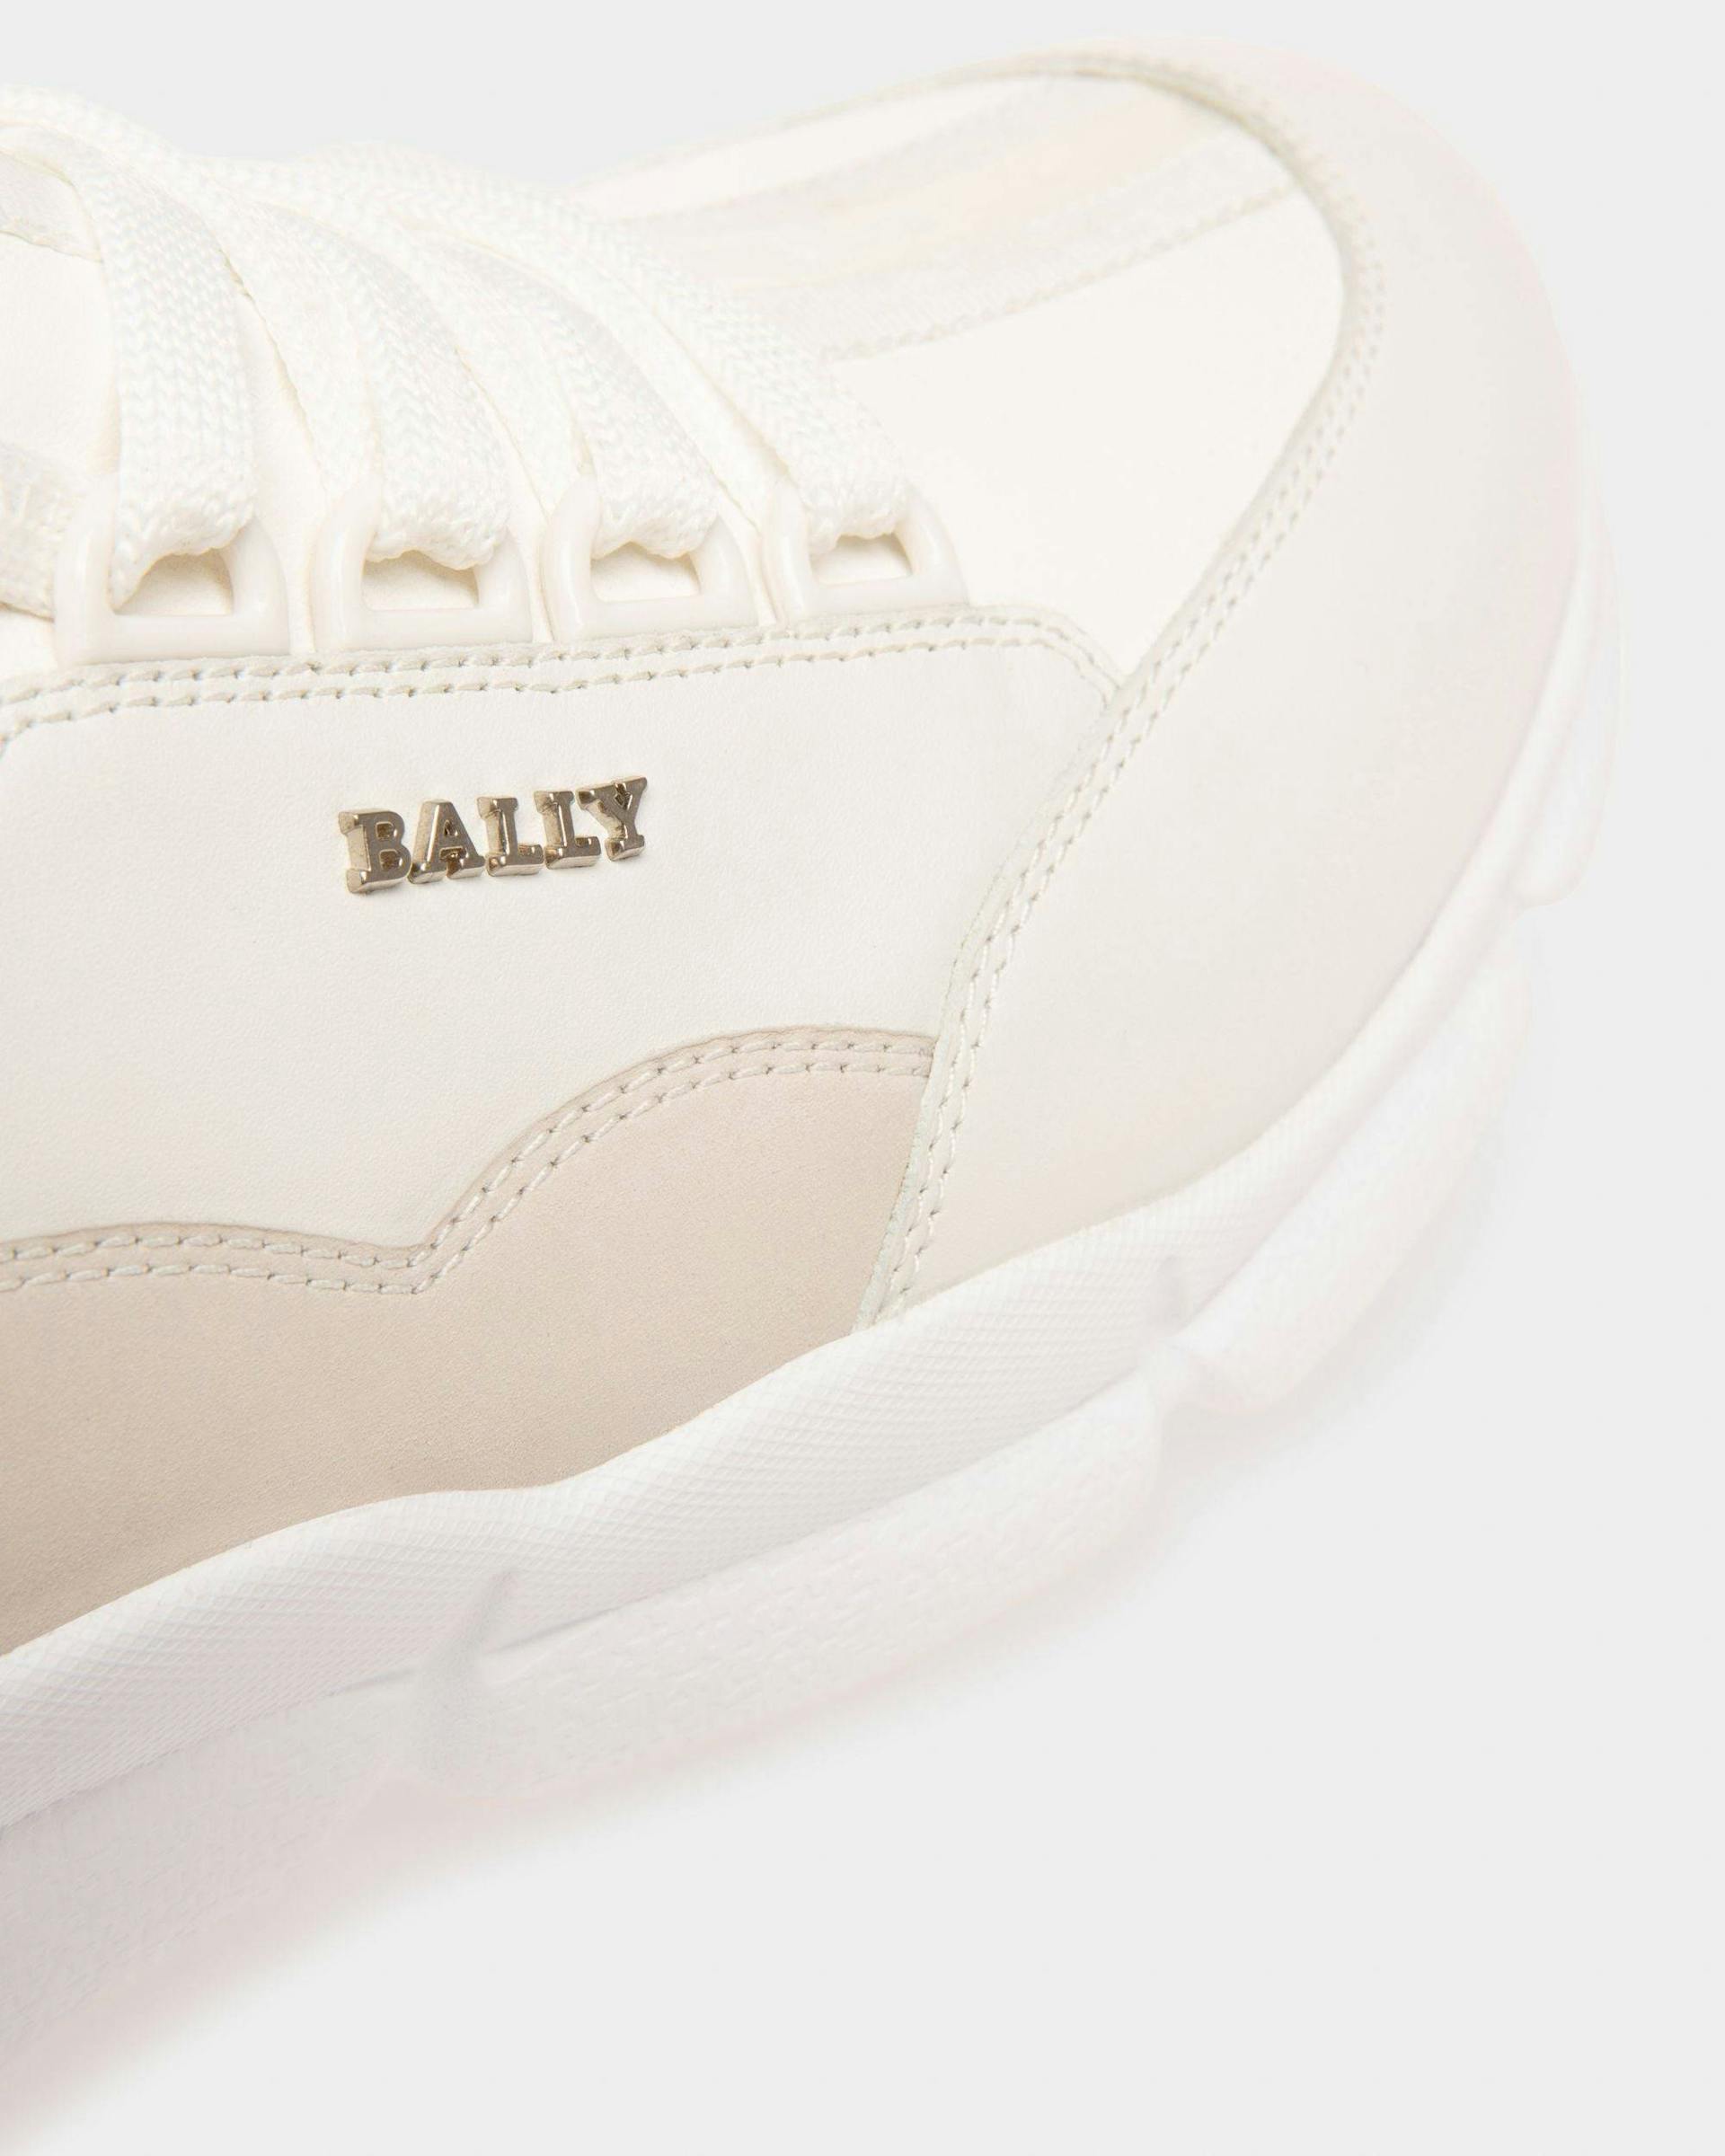 Passe Partout Bally Escapes Sneakers In Pelle Bianca - Uomo - Bally - 05